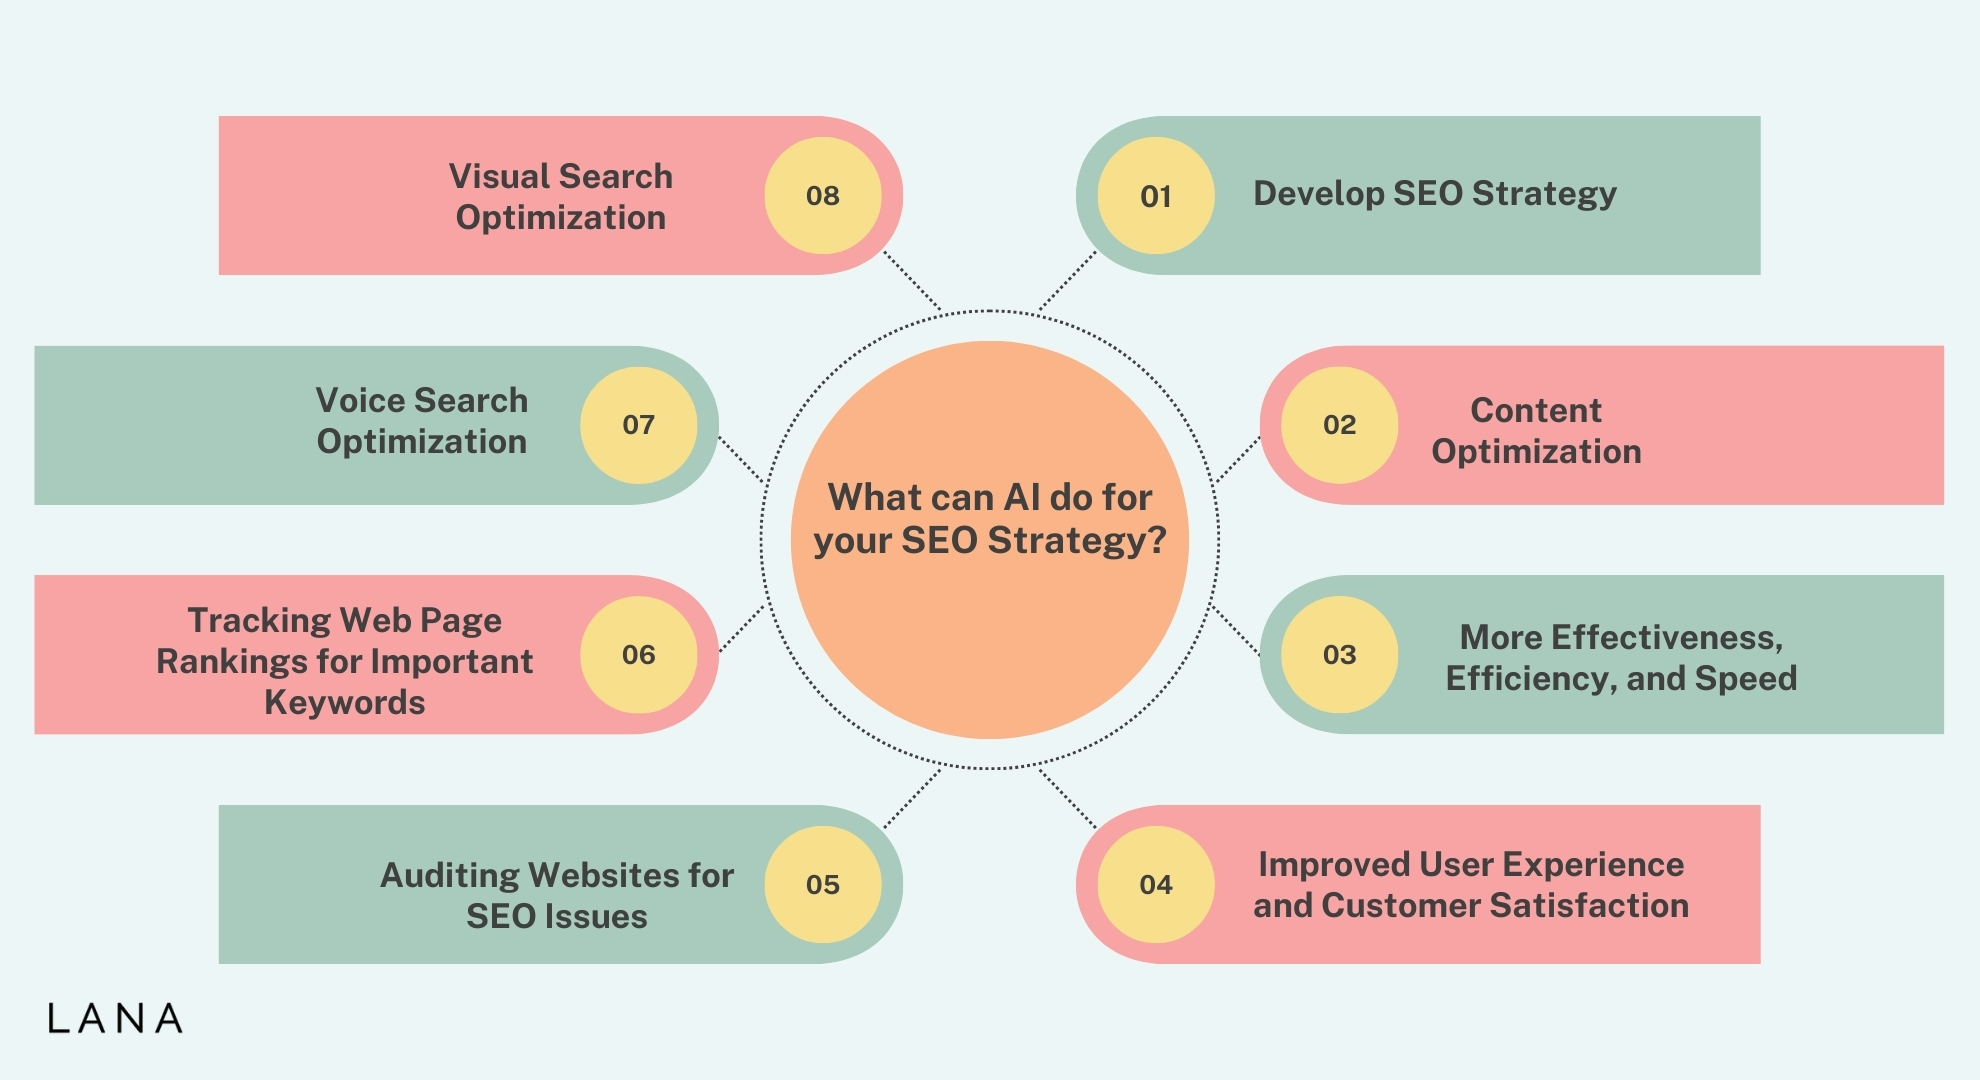 What can AI do for your SEO Strategy